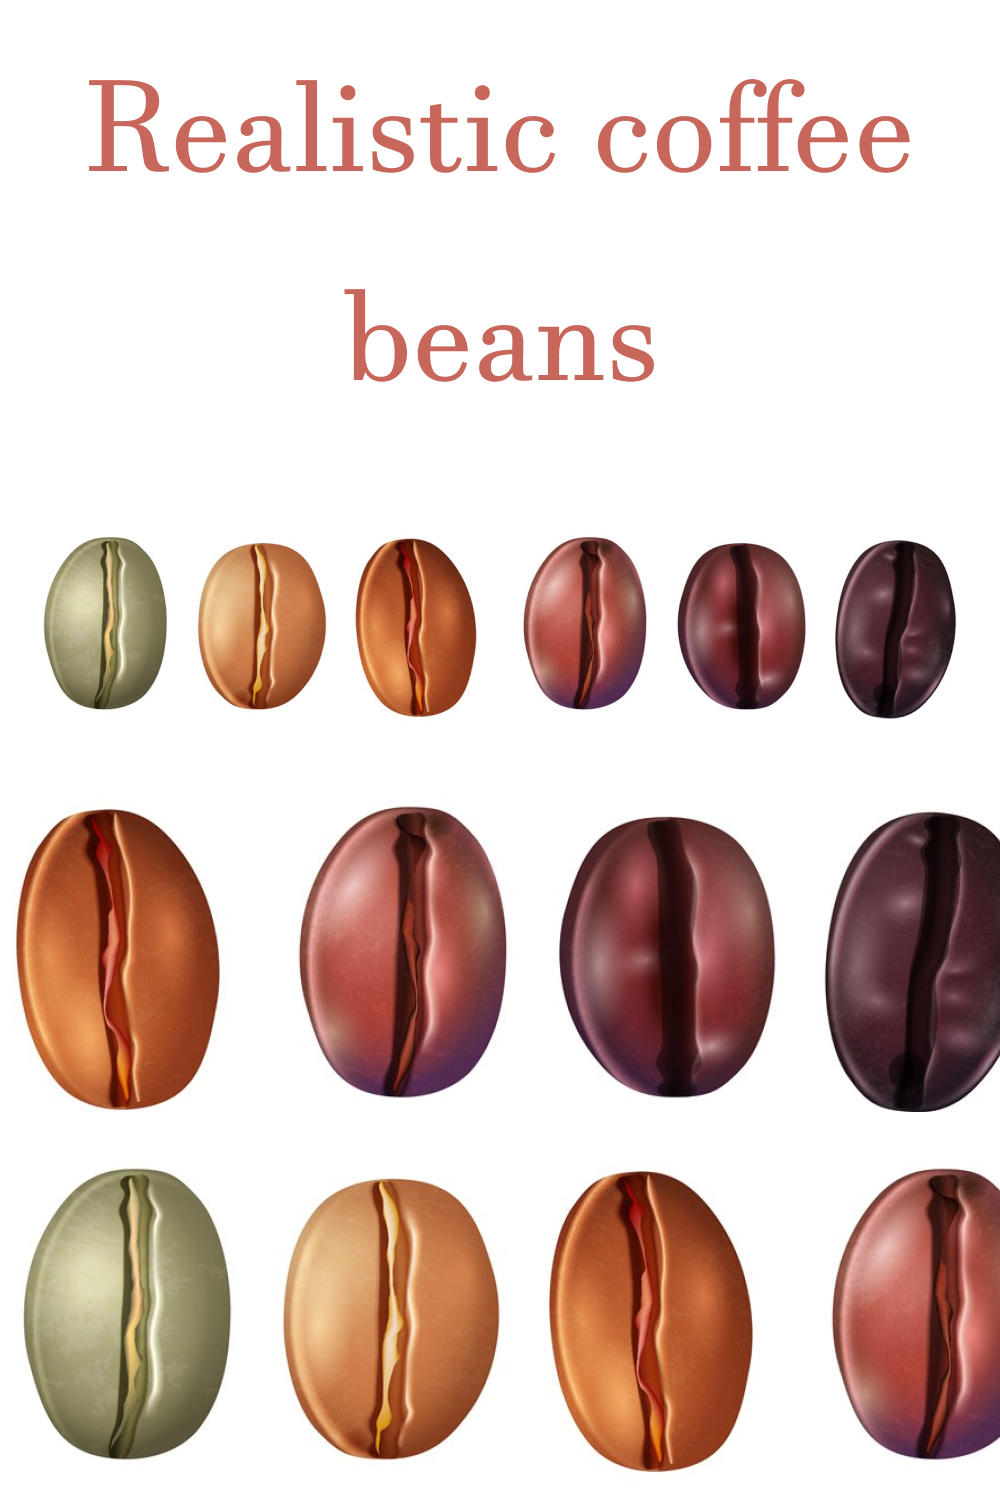 Realistic coffee beans images of pinterest.